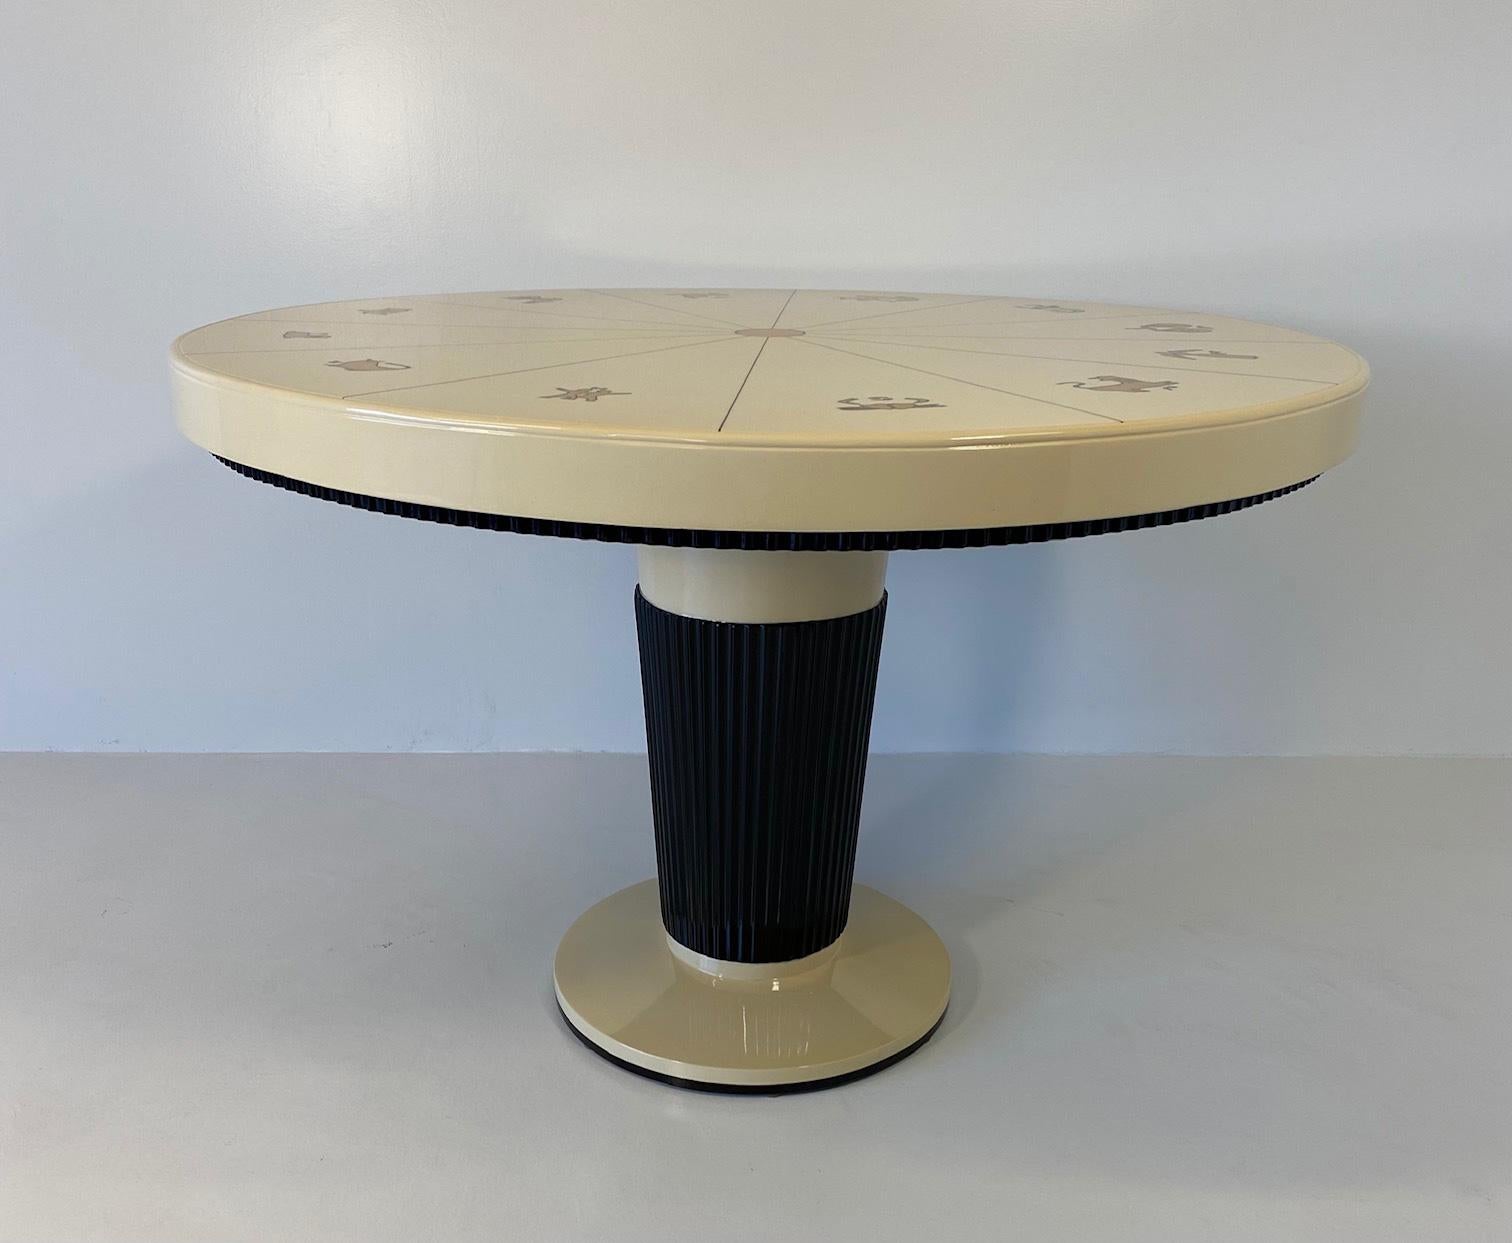 This unique table was produced in Italy in the late 1940s. 
It is completely cream lacquered with amazingly hand-made decorations in gold leaf, representing the 12 zodiac signs. The base and the profiles are black lacquered. This design clearly